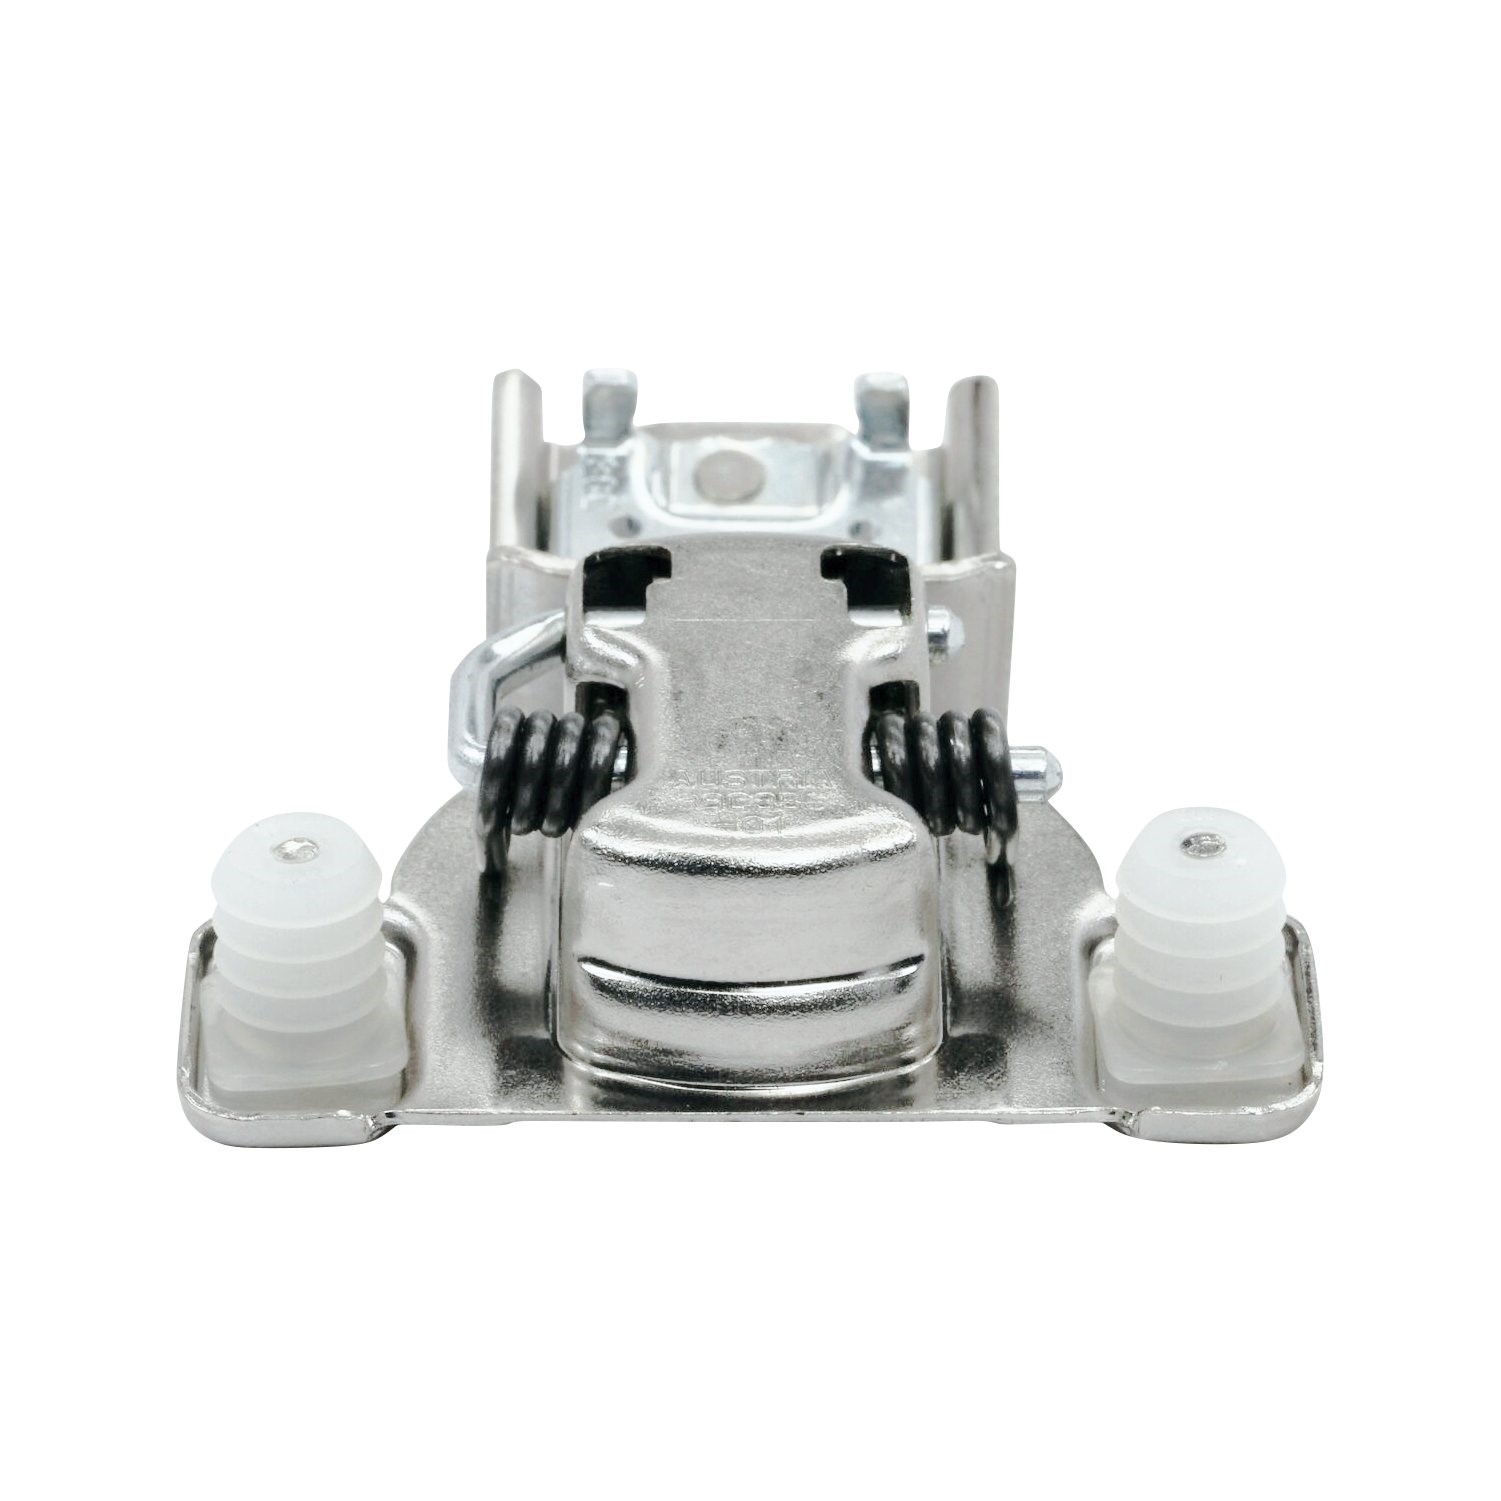 2 Pack 110 Degree Compact 39C Series 1-1/4" Overlay Press-In Self-Closing Cabinet Hinge - image 5 of 7